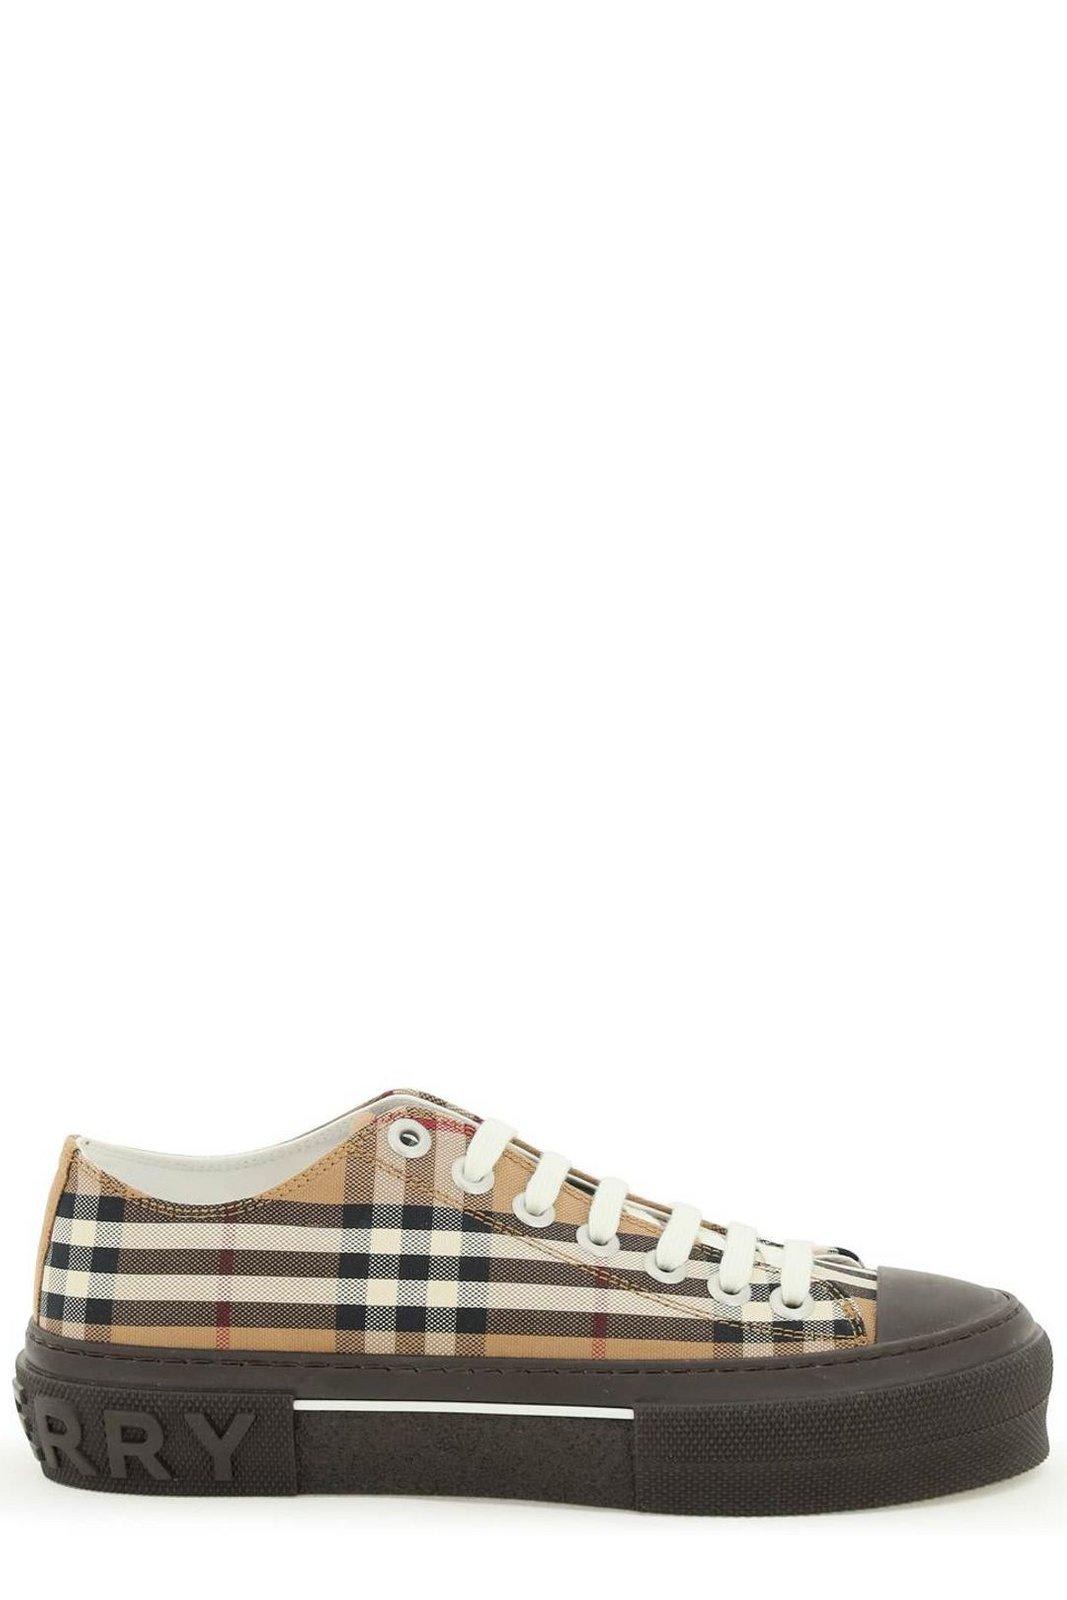 Burberry Vintage Check Low-top Sneakers